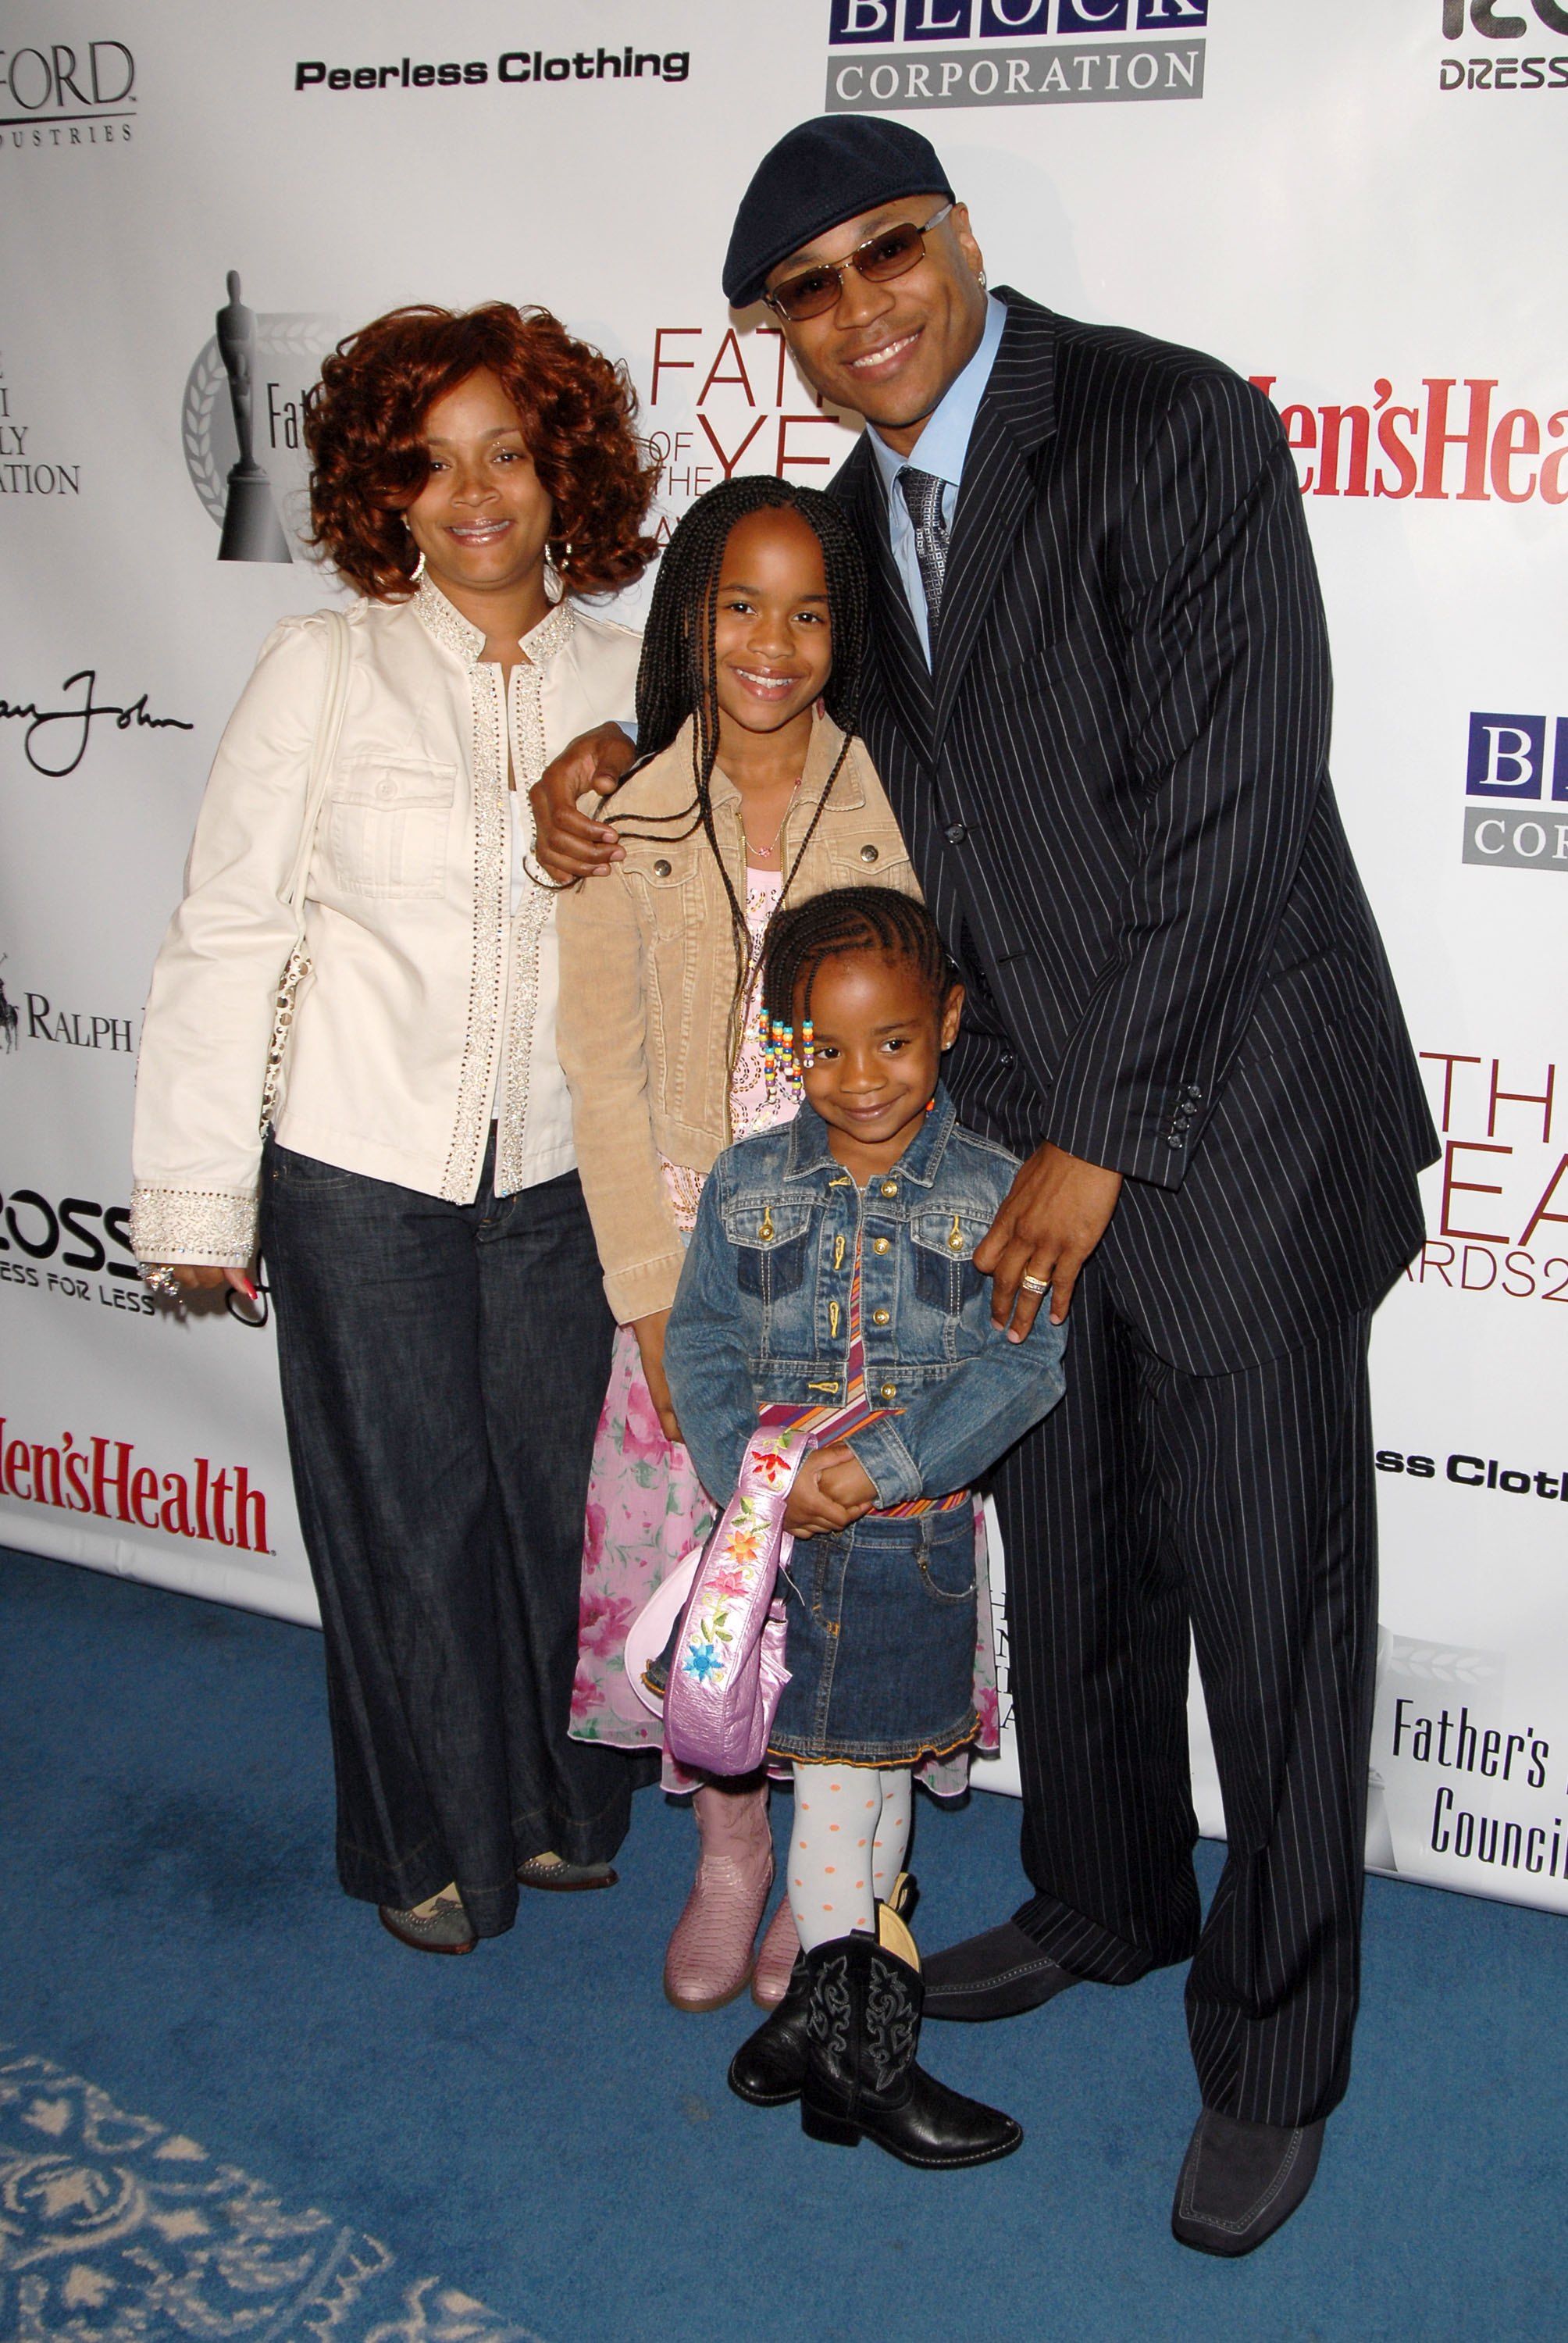 Rapper LL Cool J and family members attending the 65th Annual Father of the Year Awards on June 8, 2006 in NY. | Photo: Getty Images